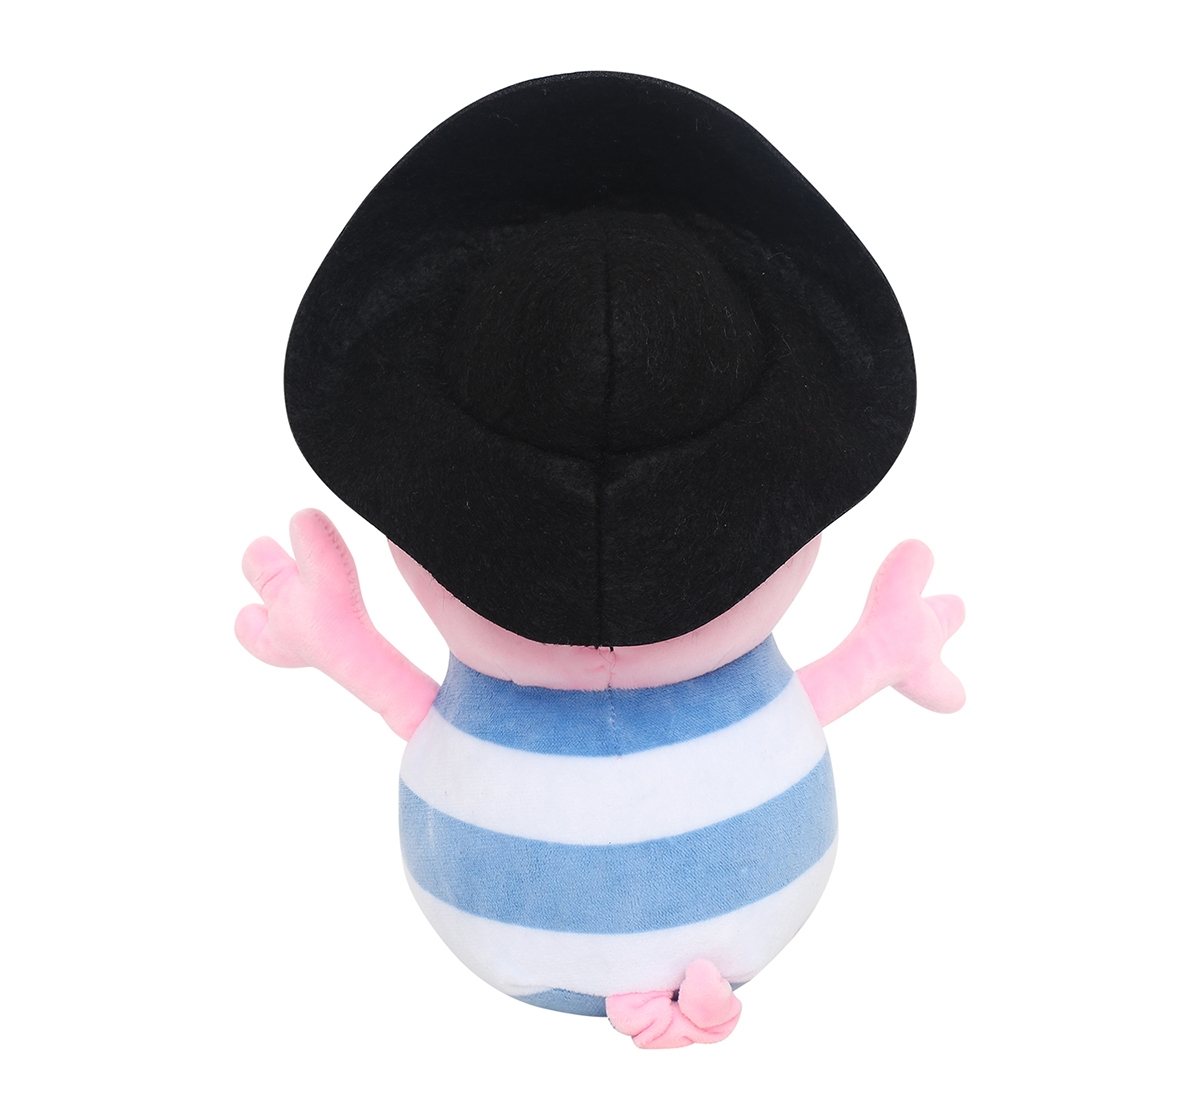 Peppa Pig | Peppa Pig In Pirate Costume Multi Color 30 Cm Soft Toy for Kids age 3Y+ - 30 Cm 3